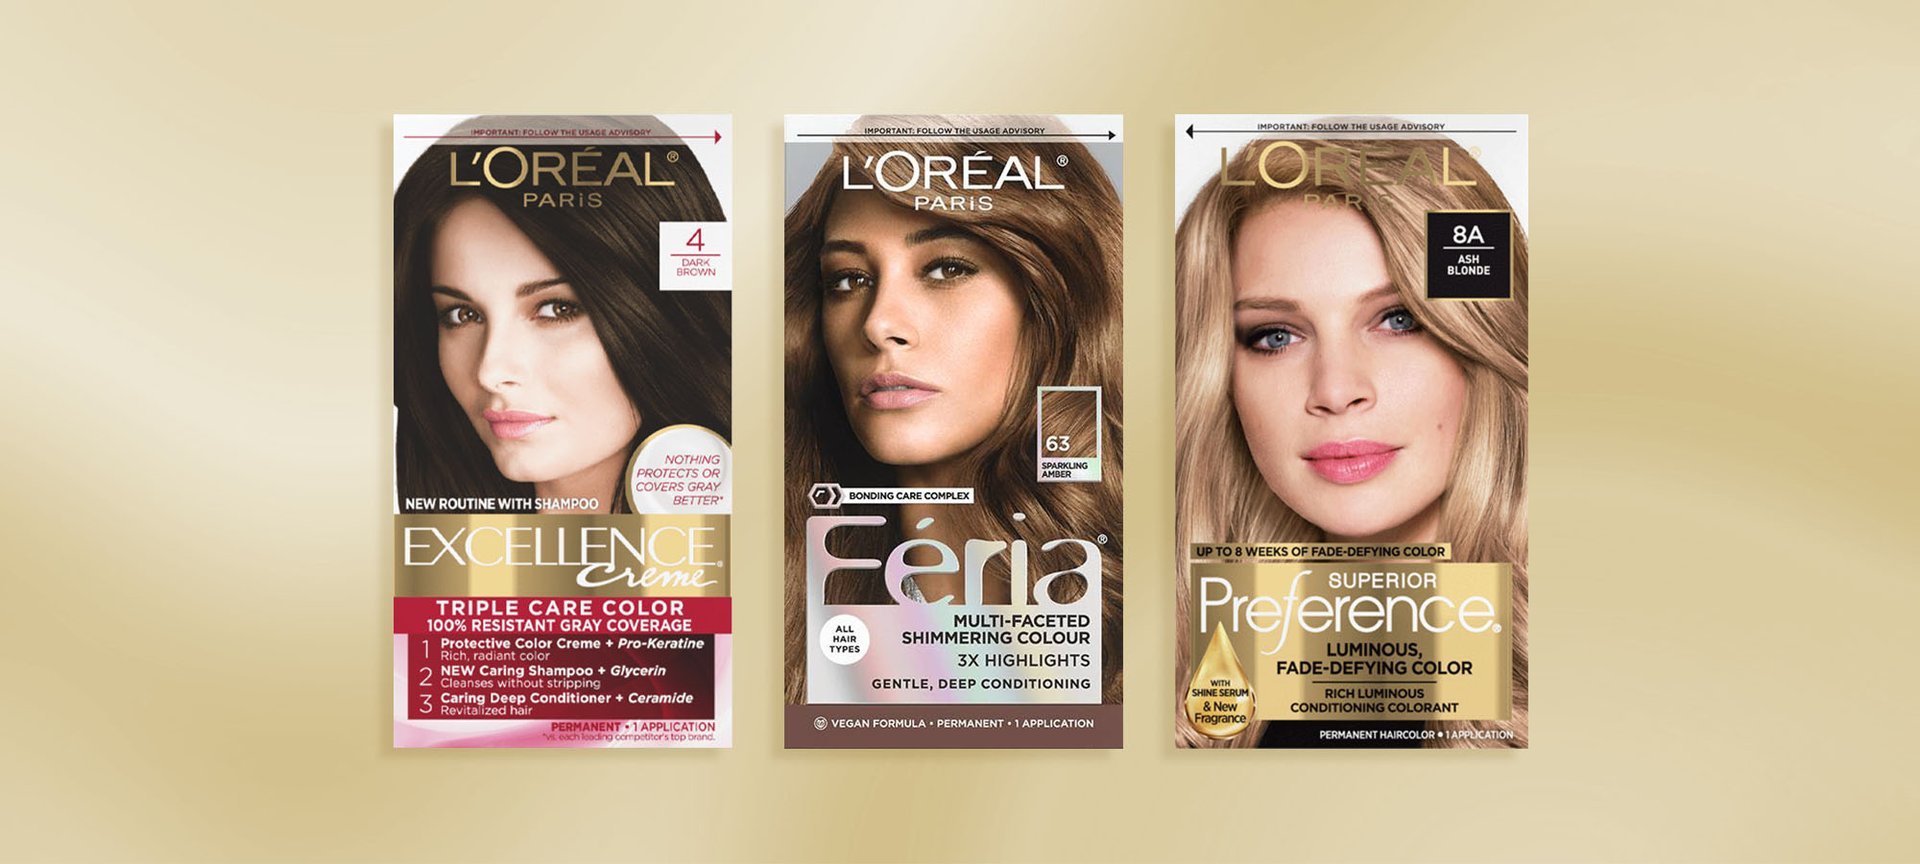 https://www.lorealparisusa.com/-/media/project/loreal/brand-sites/oap/americas/us/beauty-magazine/2023/12-december/12-6/how-to-dye-your-hair-at-home/loreal-paris-boxed-hair-color-collage.jpg